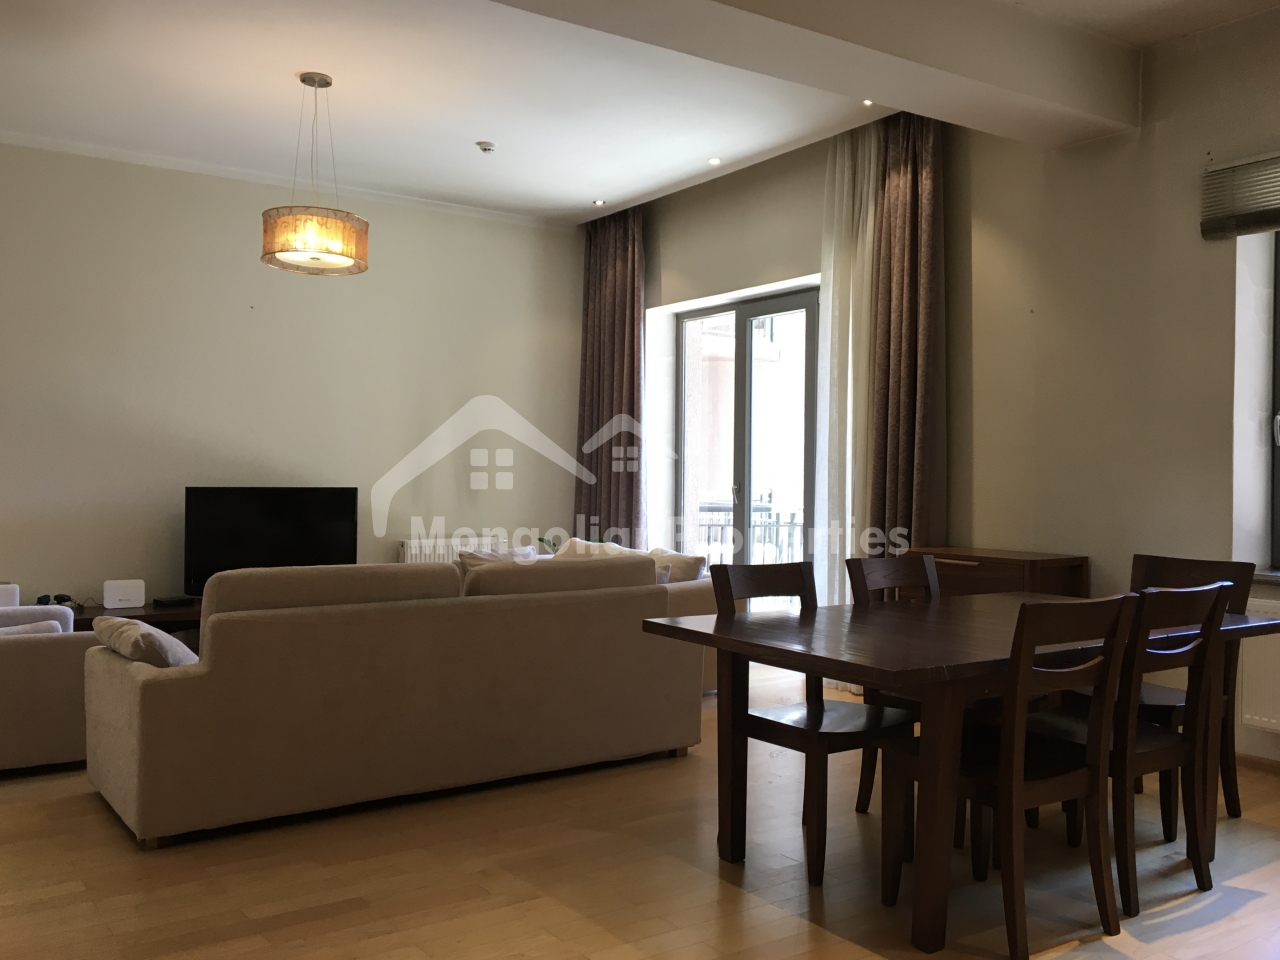 3 BEDROOMS APARTMENT FOR RENT IN REGENCY RESIDENCE, IN EMBASSY AREA